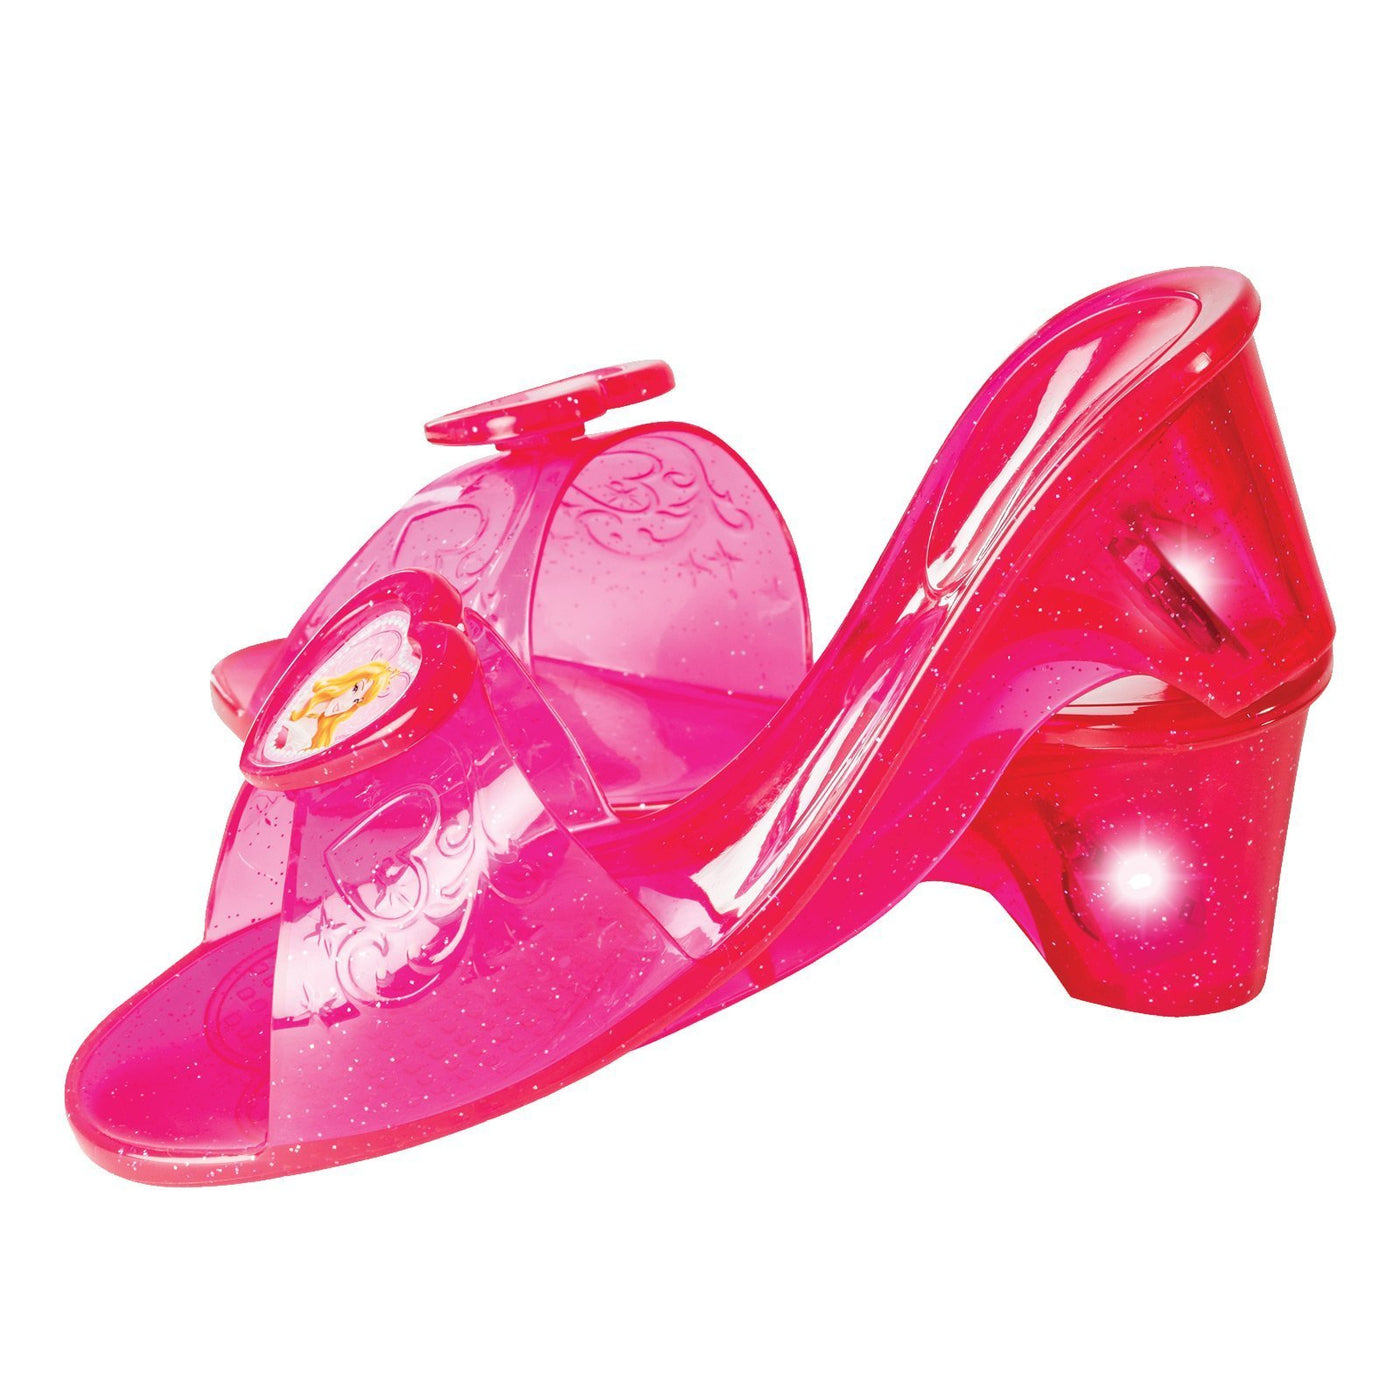 Sleeping Beauty Ultimate Princess Light Up Jelly Shoes for Kids - Disn ...